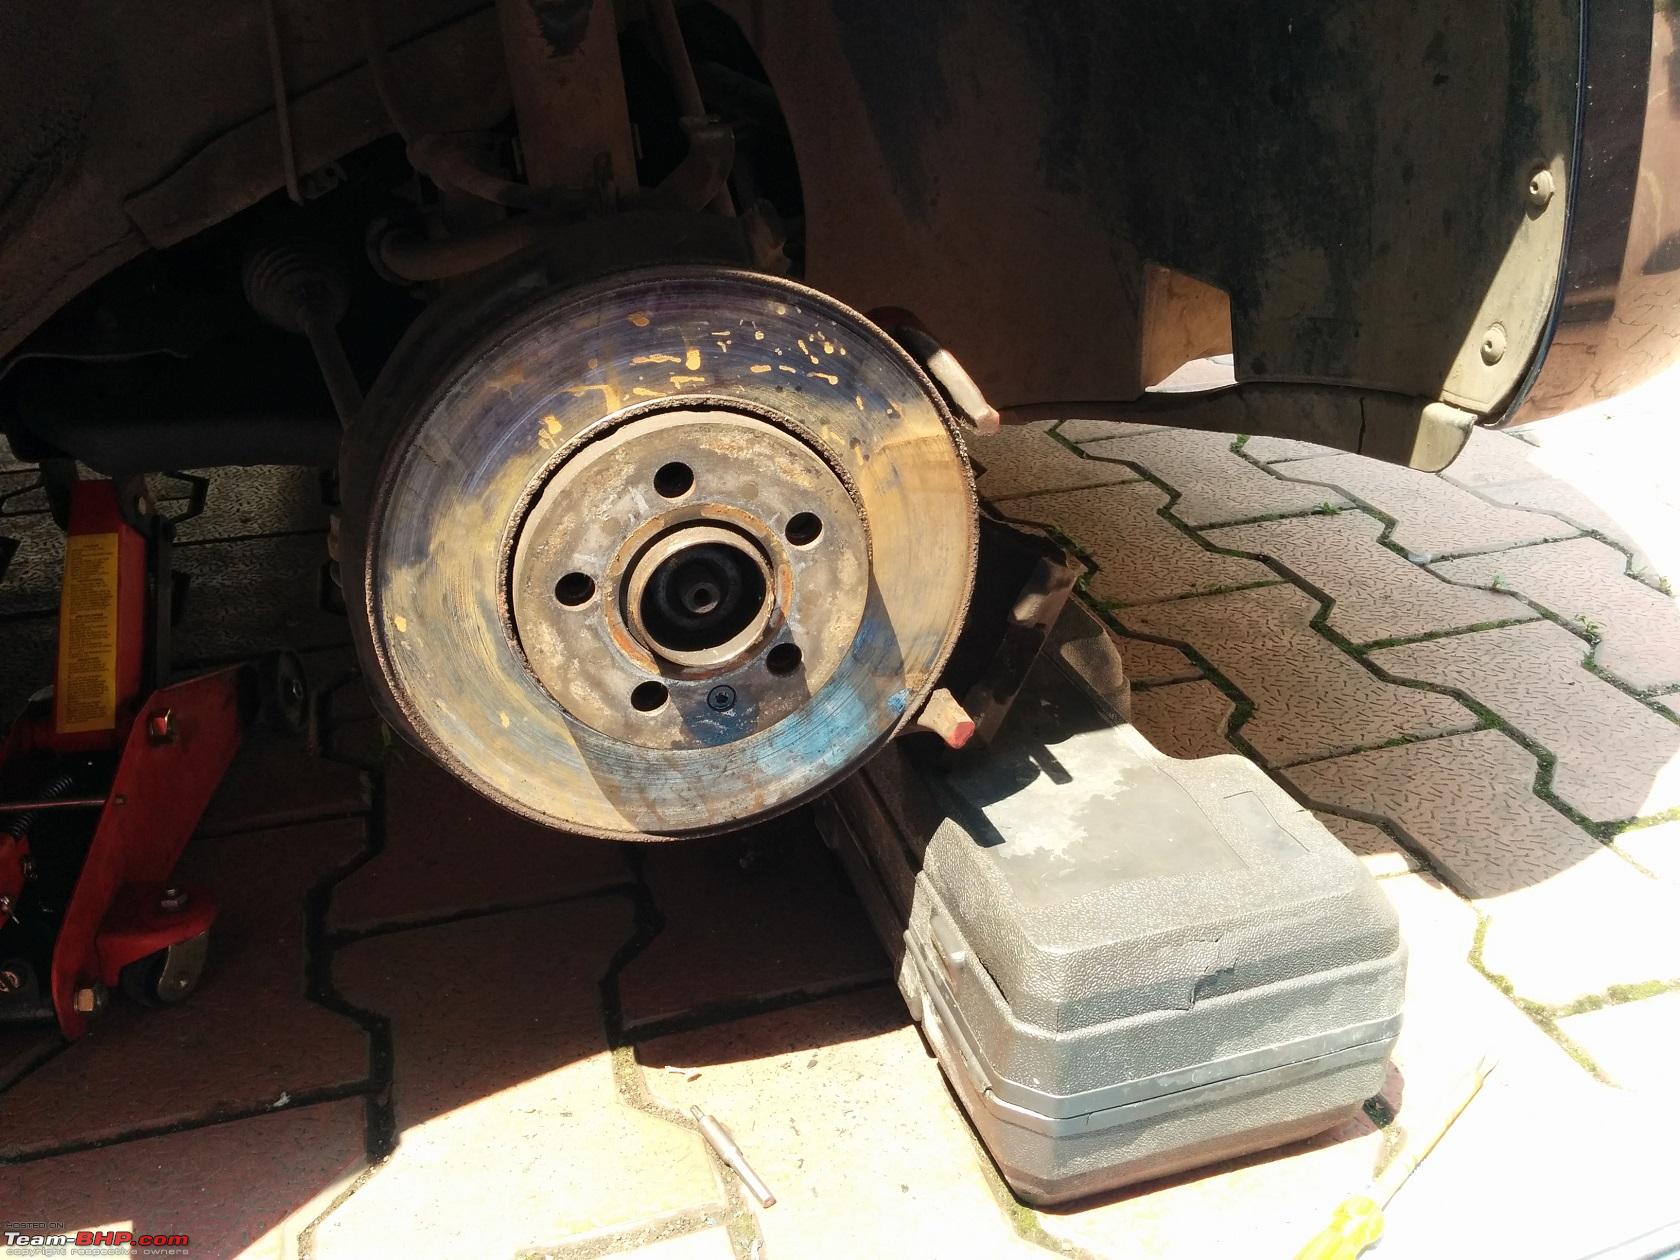 CHECK SIZE SKODA OCTAVIA 1.4 TSI 09-13 FRONT AND REAR BRAKE DISCS AND PADS 